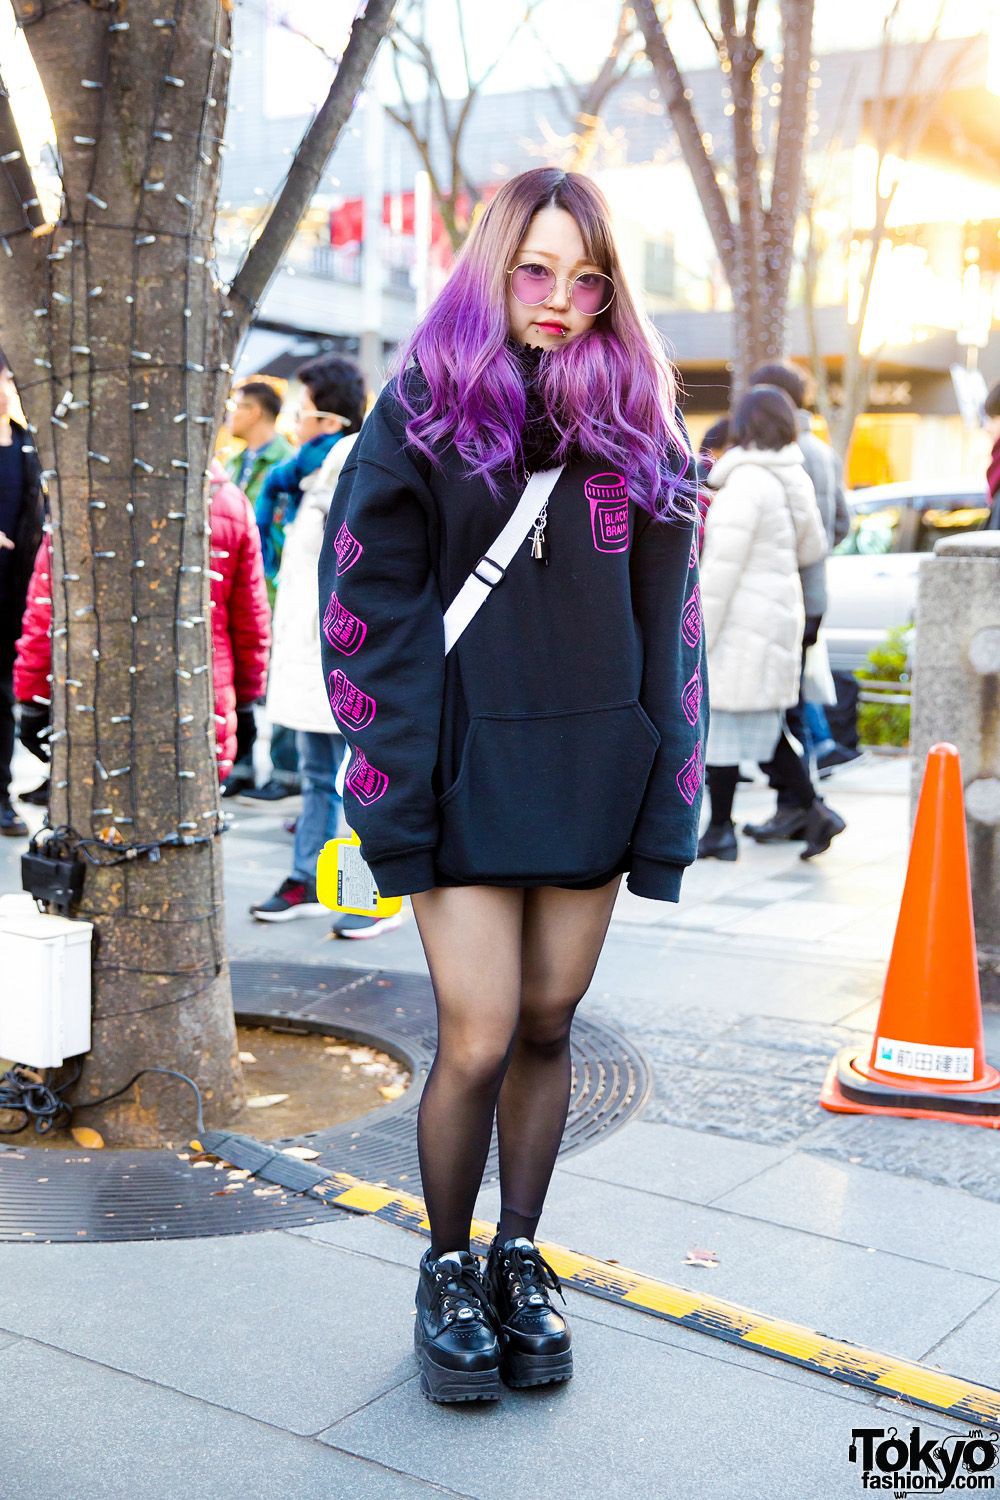 Yellow and purple instagram fashion with hoodie | Creeper Shoes Outfits ...